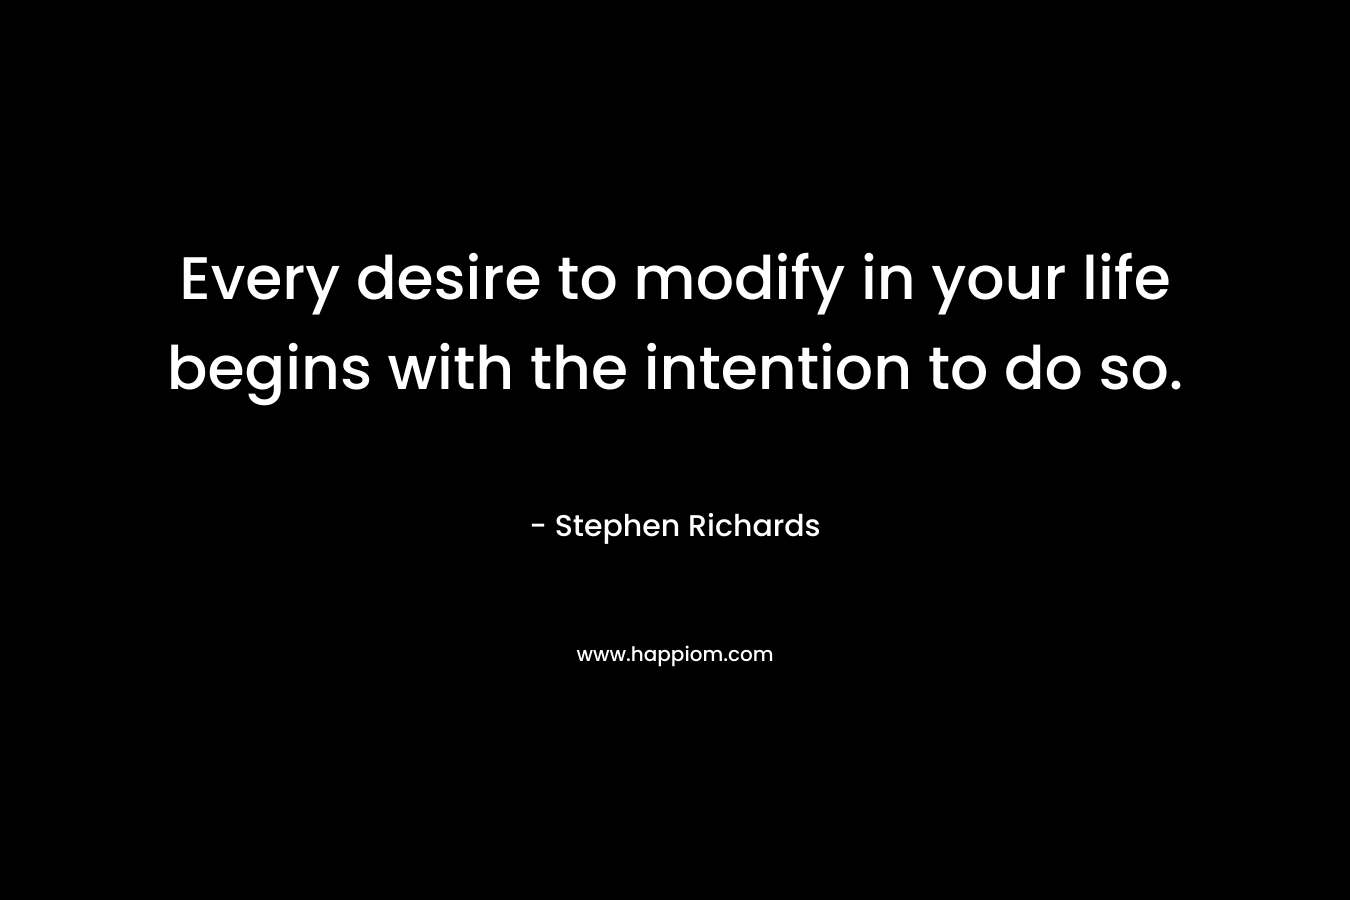 Every desire to modify in your life begins with the intention to do so. – Stephen Richards